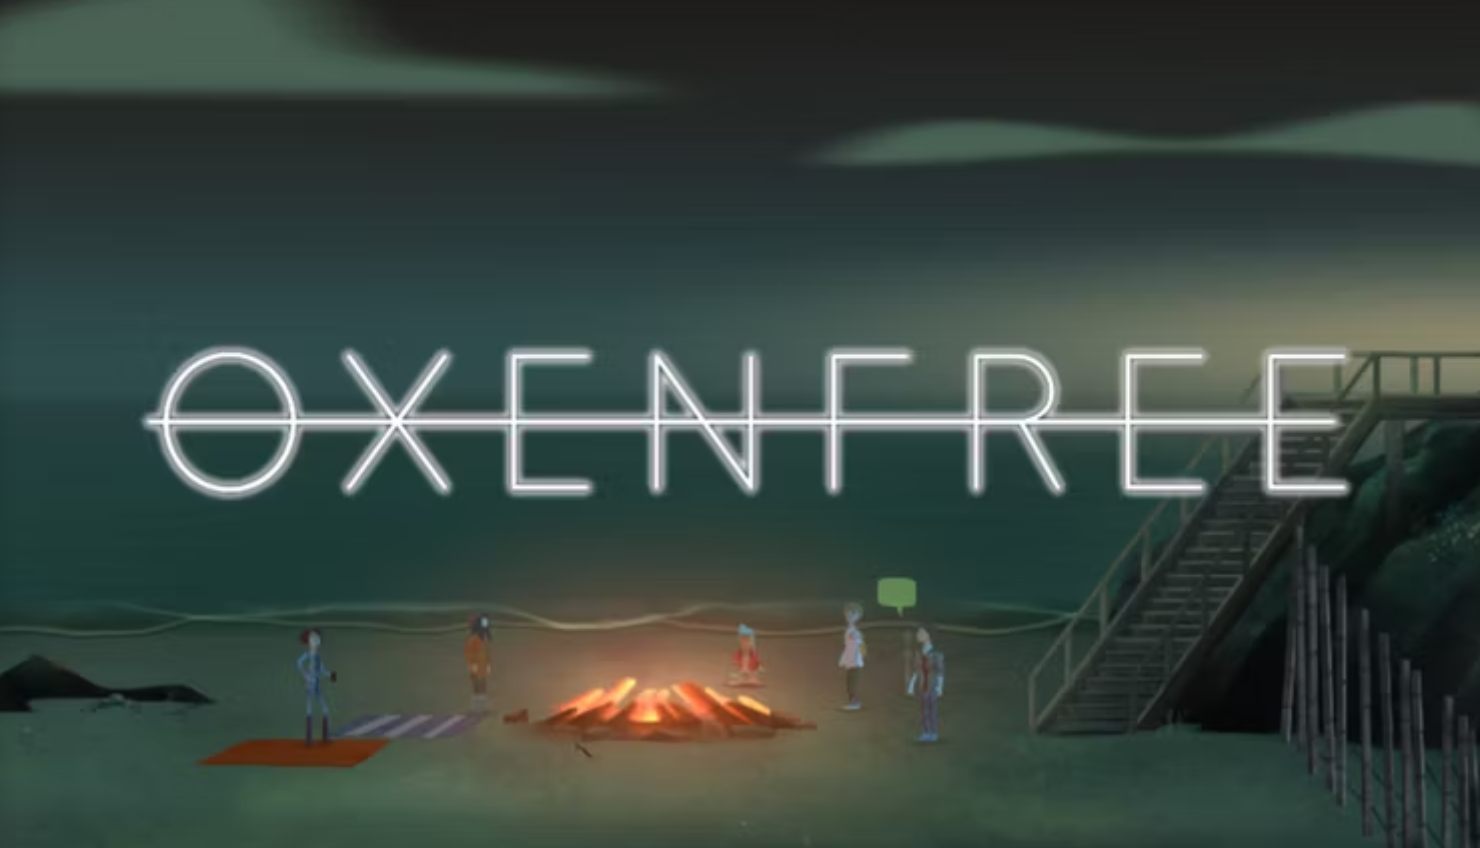 Oxenfree 2: The Lost Signals